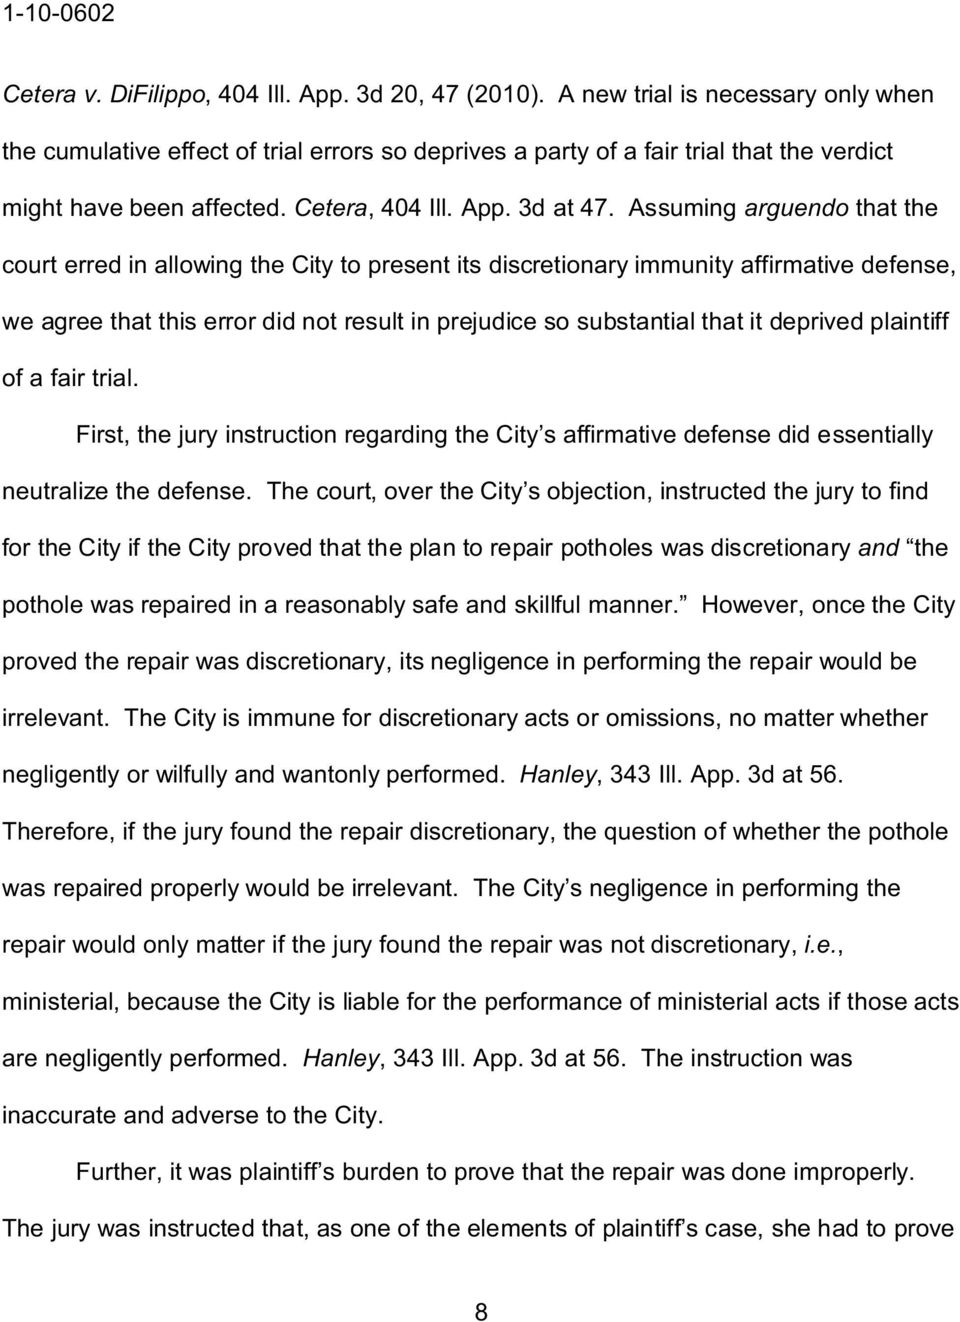 Assuming arguendo that the court erred in allowing the City to present its discretionary immunity affirmative defense, we agree that this error did not result in prejudice so substantial that it